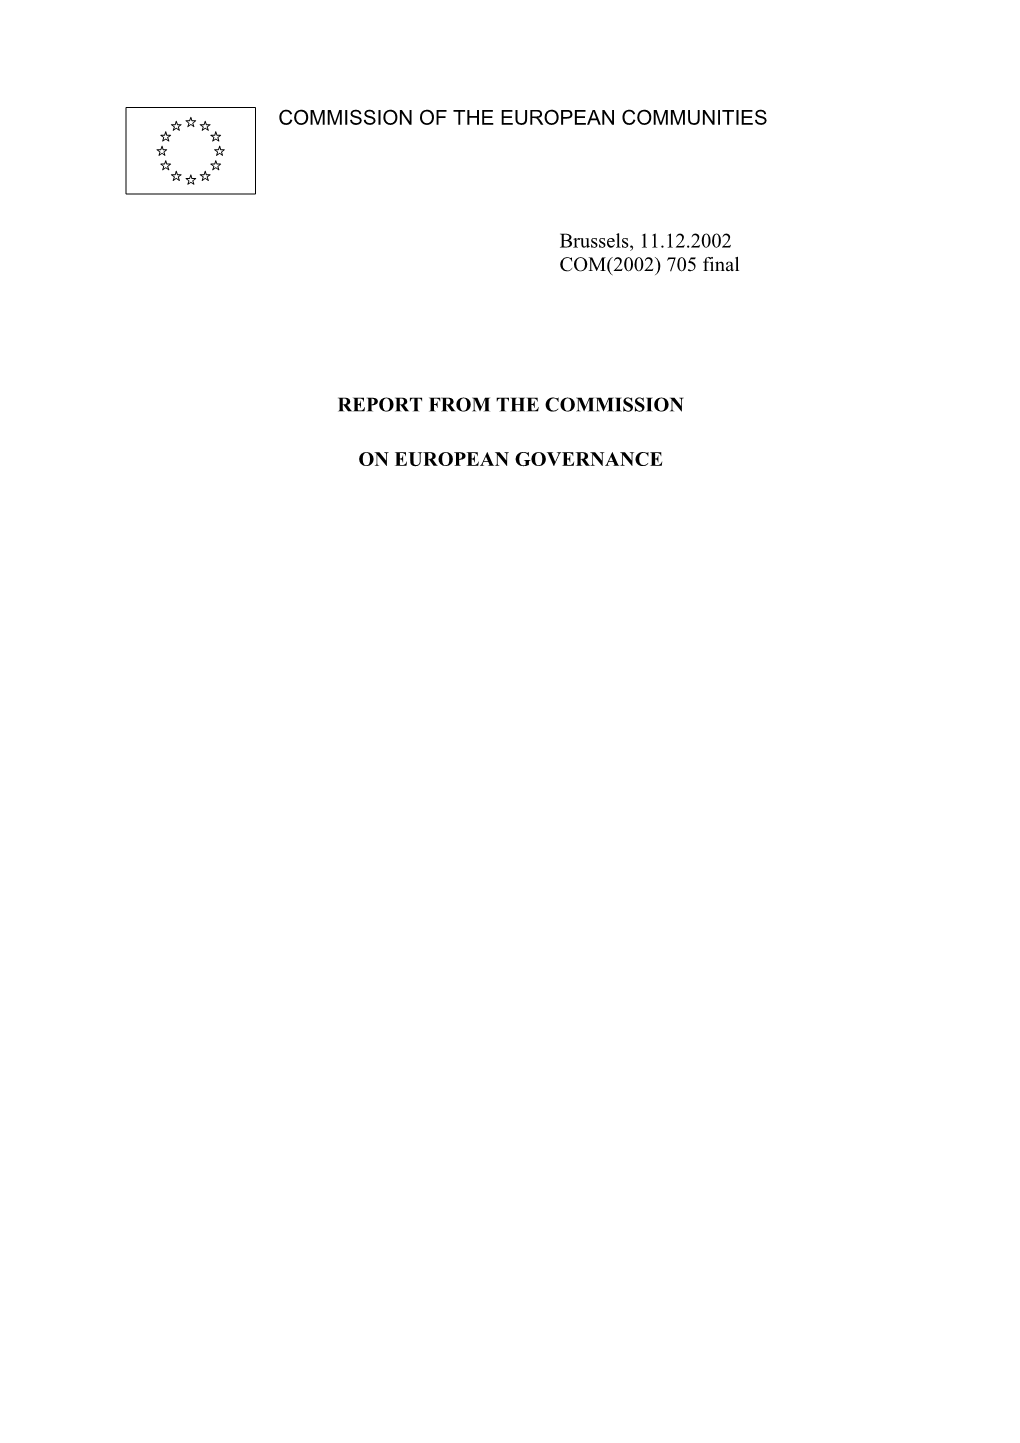 705 Final REPORT from the COMMISSION on EUROPEAN